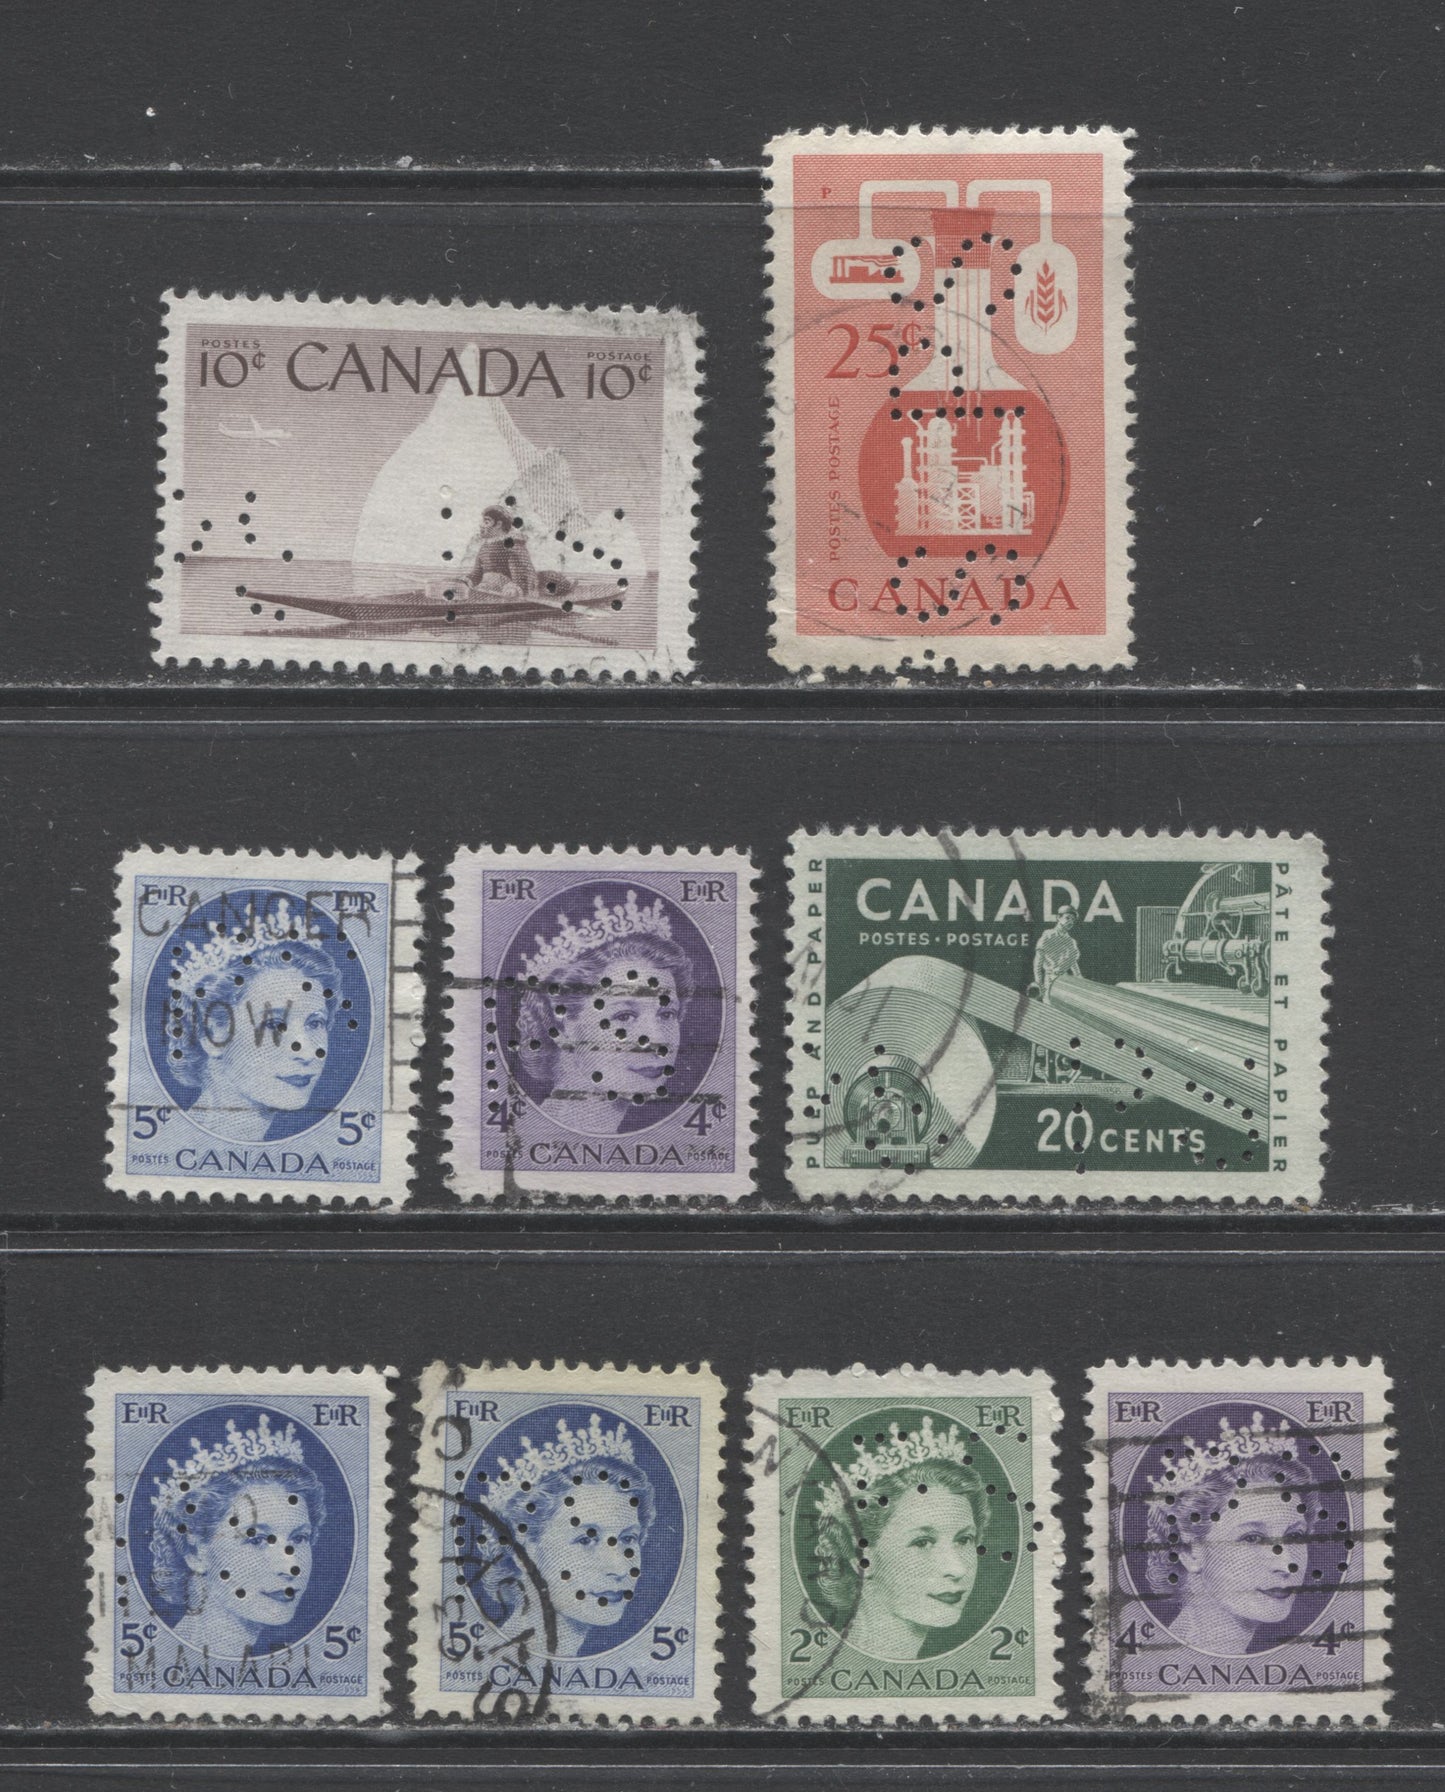 Lot 294 Canada #338, 340i,ii 341i, 351, 362-363 2c/25c Green/Red Queen Elizabeth II/Chemistry, 1954 Wilding Definitives, 9 Fine/Very Fine Used Singles With PS Perfins, Including 4c & 5c On Fluorescent Papers